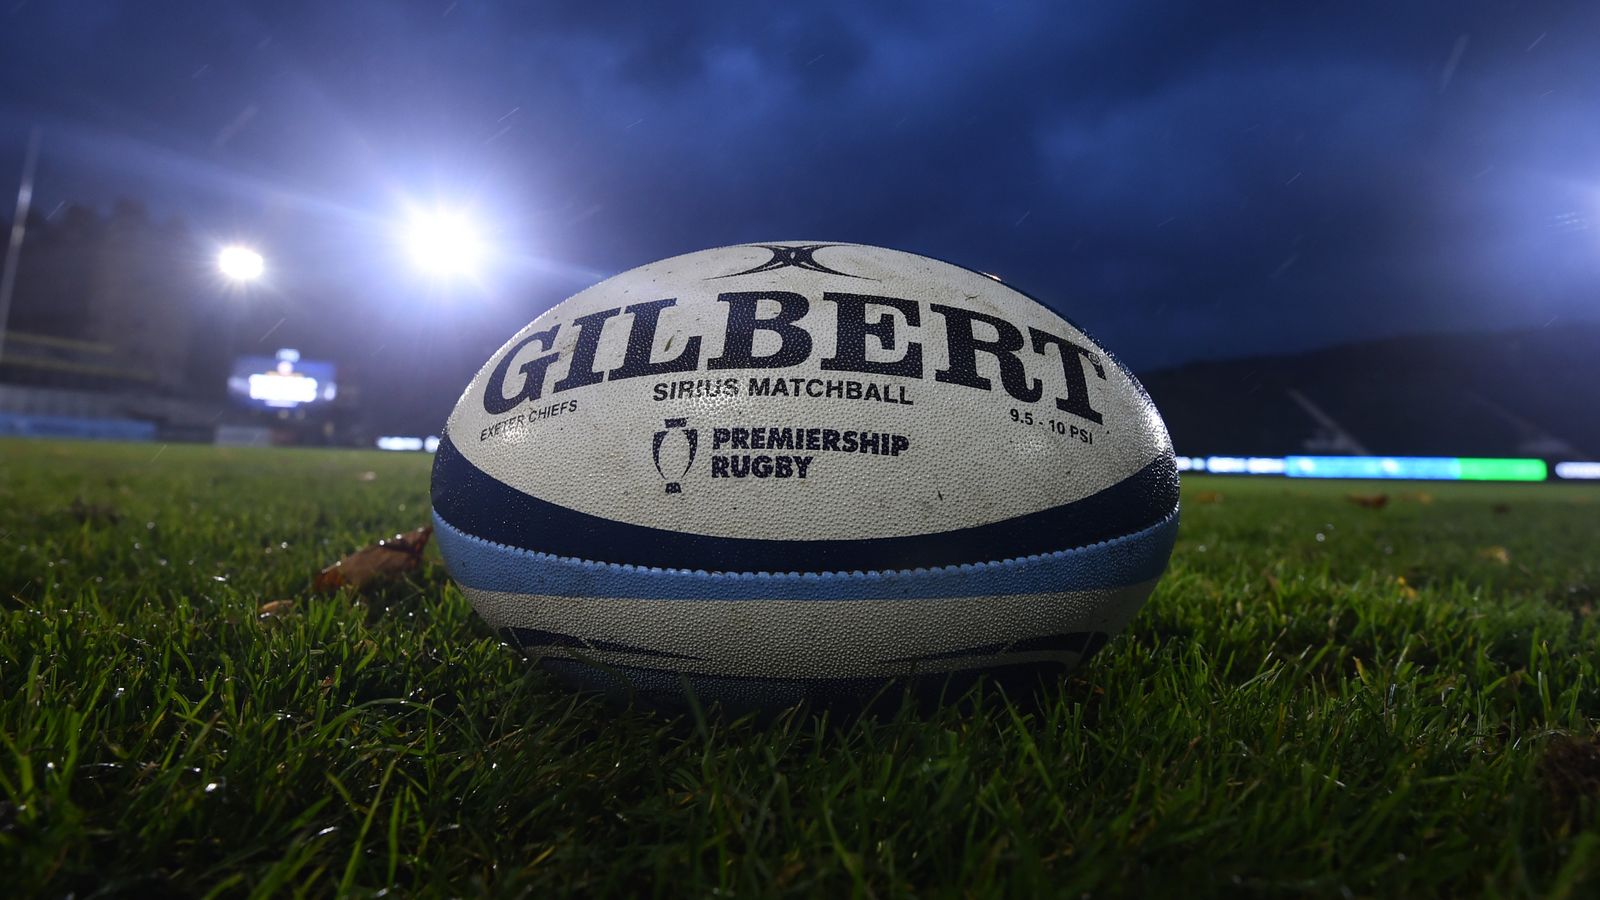 Premiership Rugby: Salary Cap report published for 2020-21 season